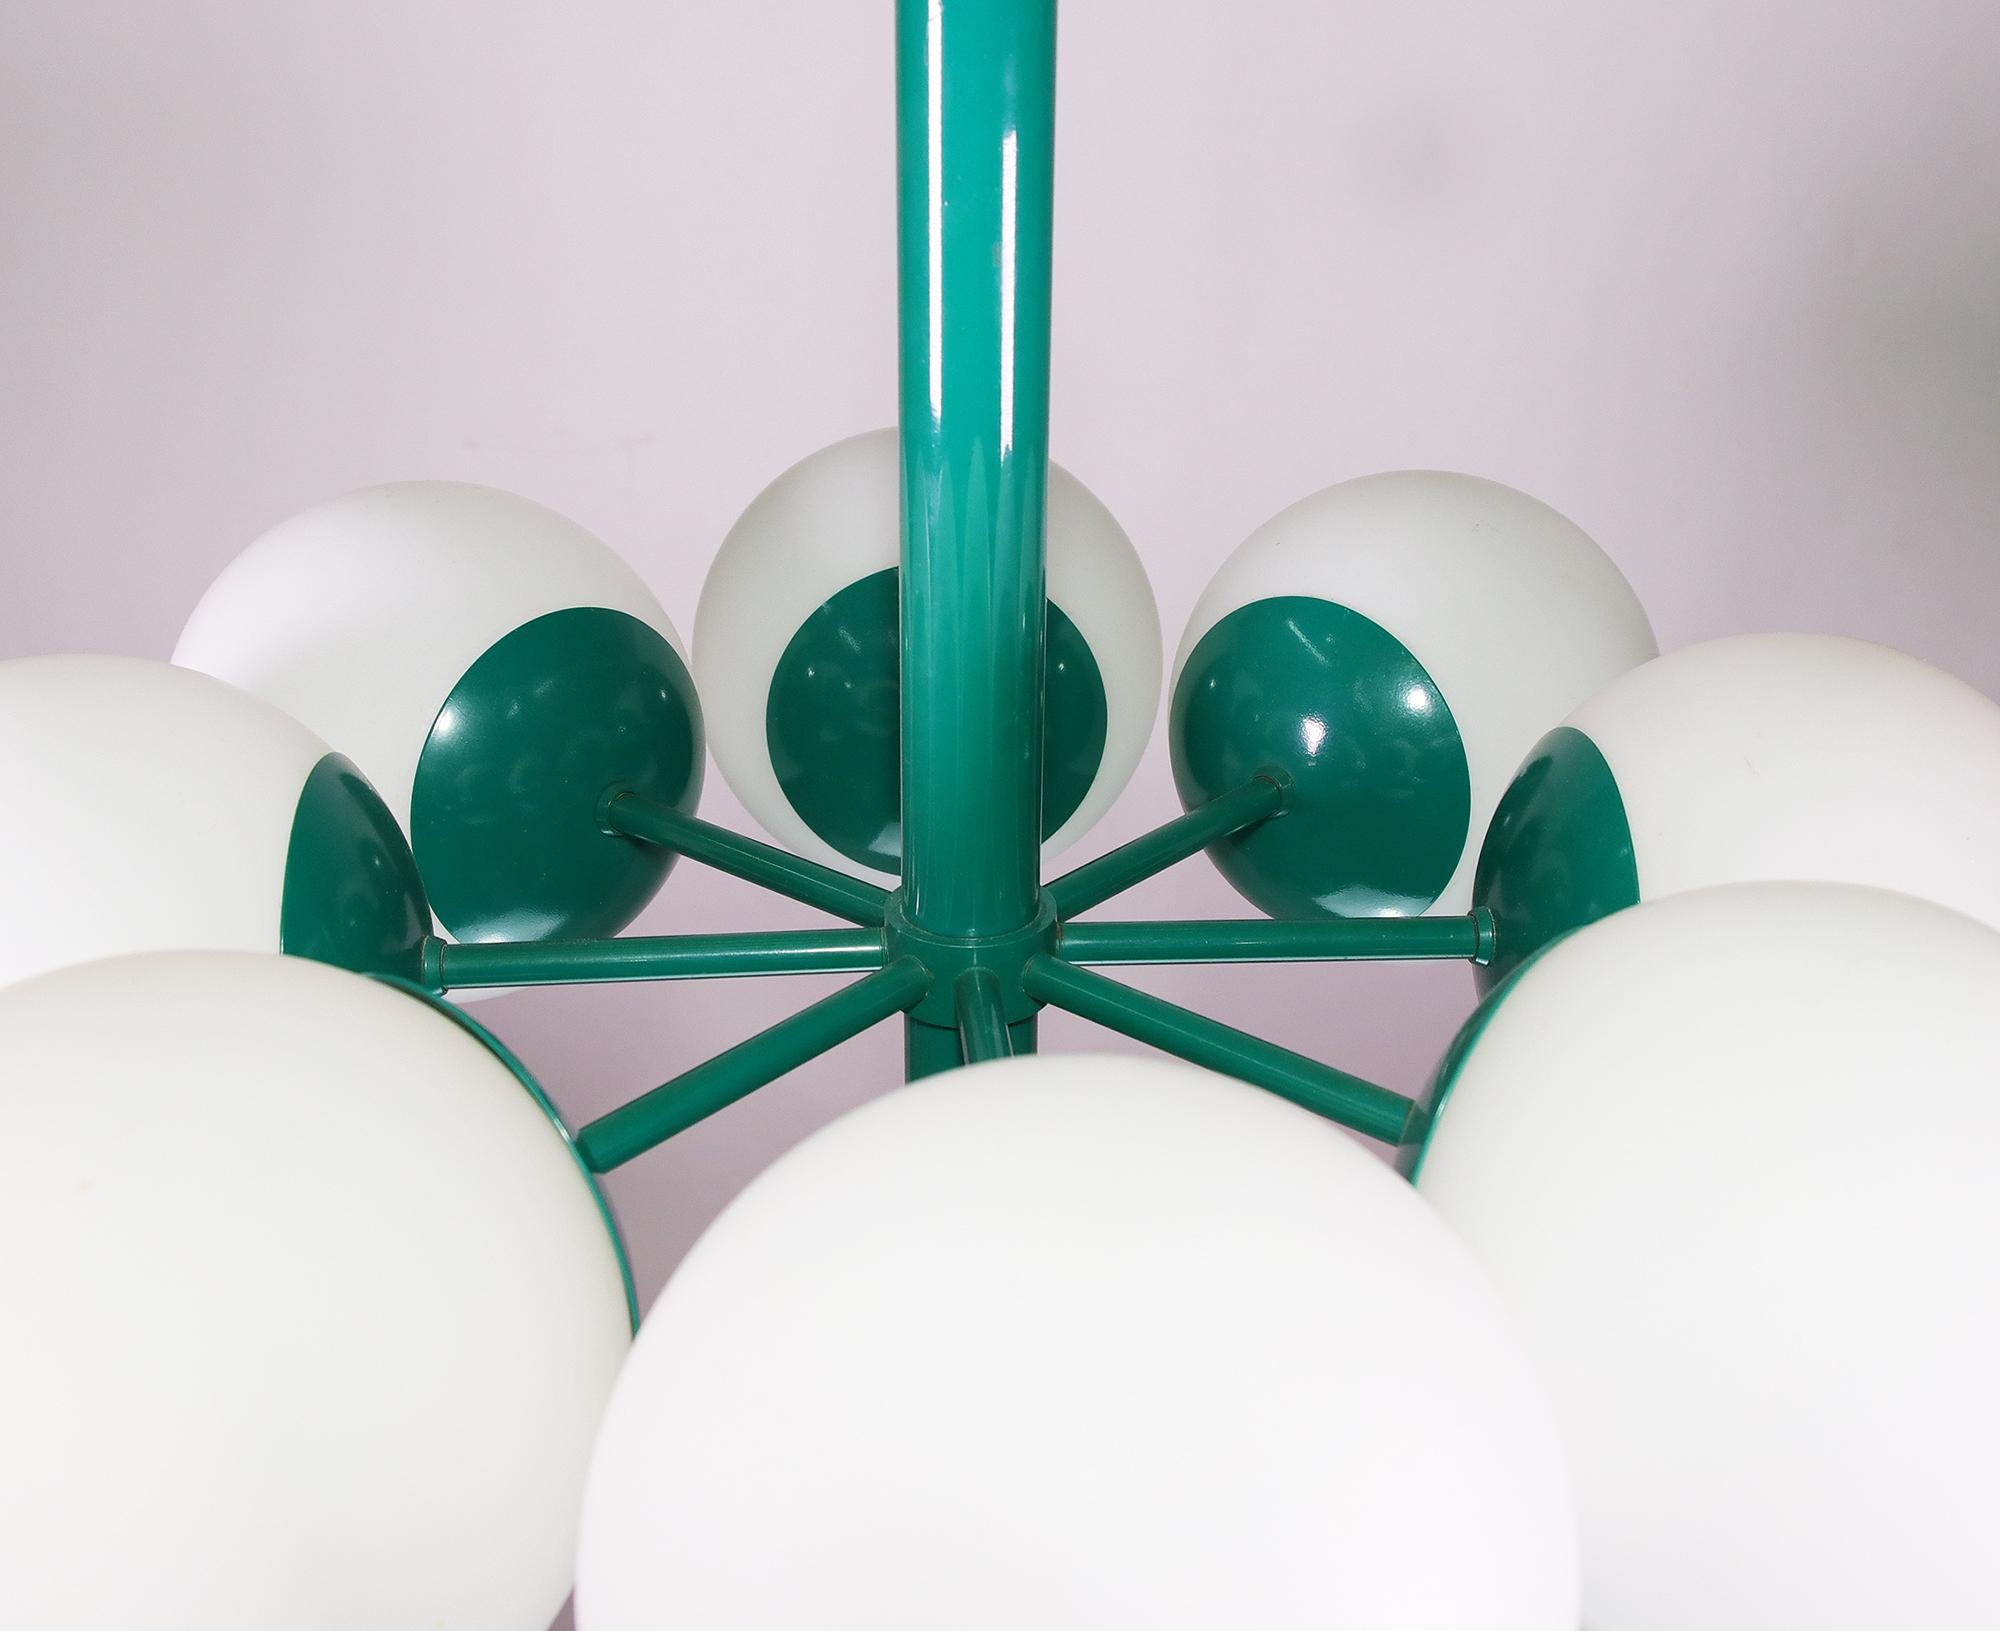 Kaiser atomic chandelier with eight white opal glass balls on an green metal frame, made by Kaiser Leuchten in Germany in the 1960s.
Very good condition with all original components.
European wiring with eight small Edison bulbs E14 and fabric